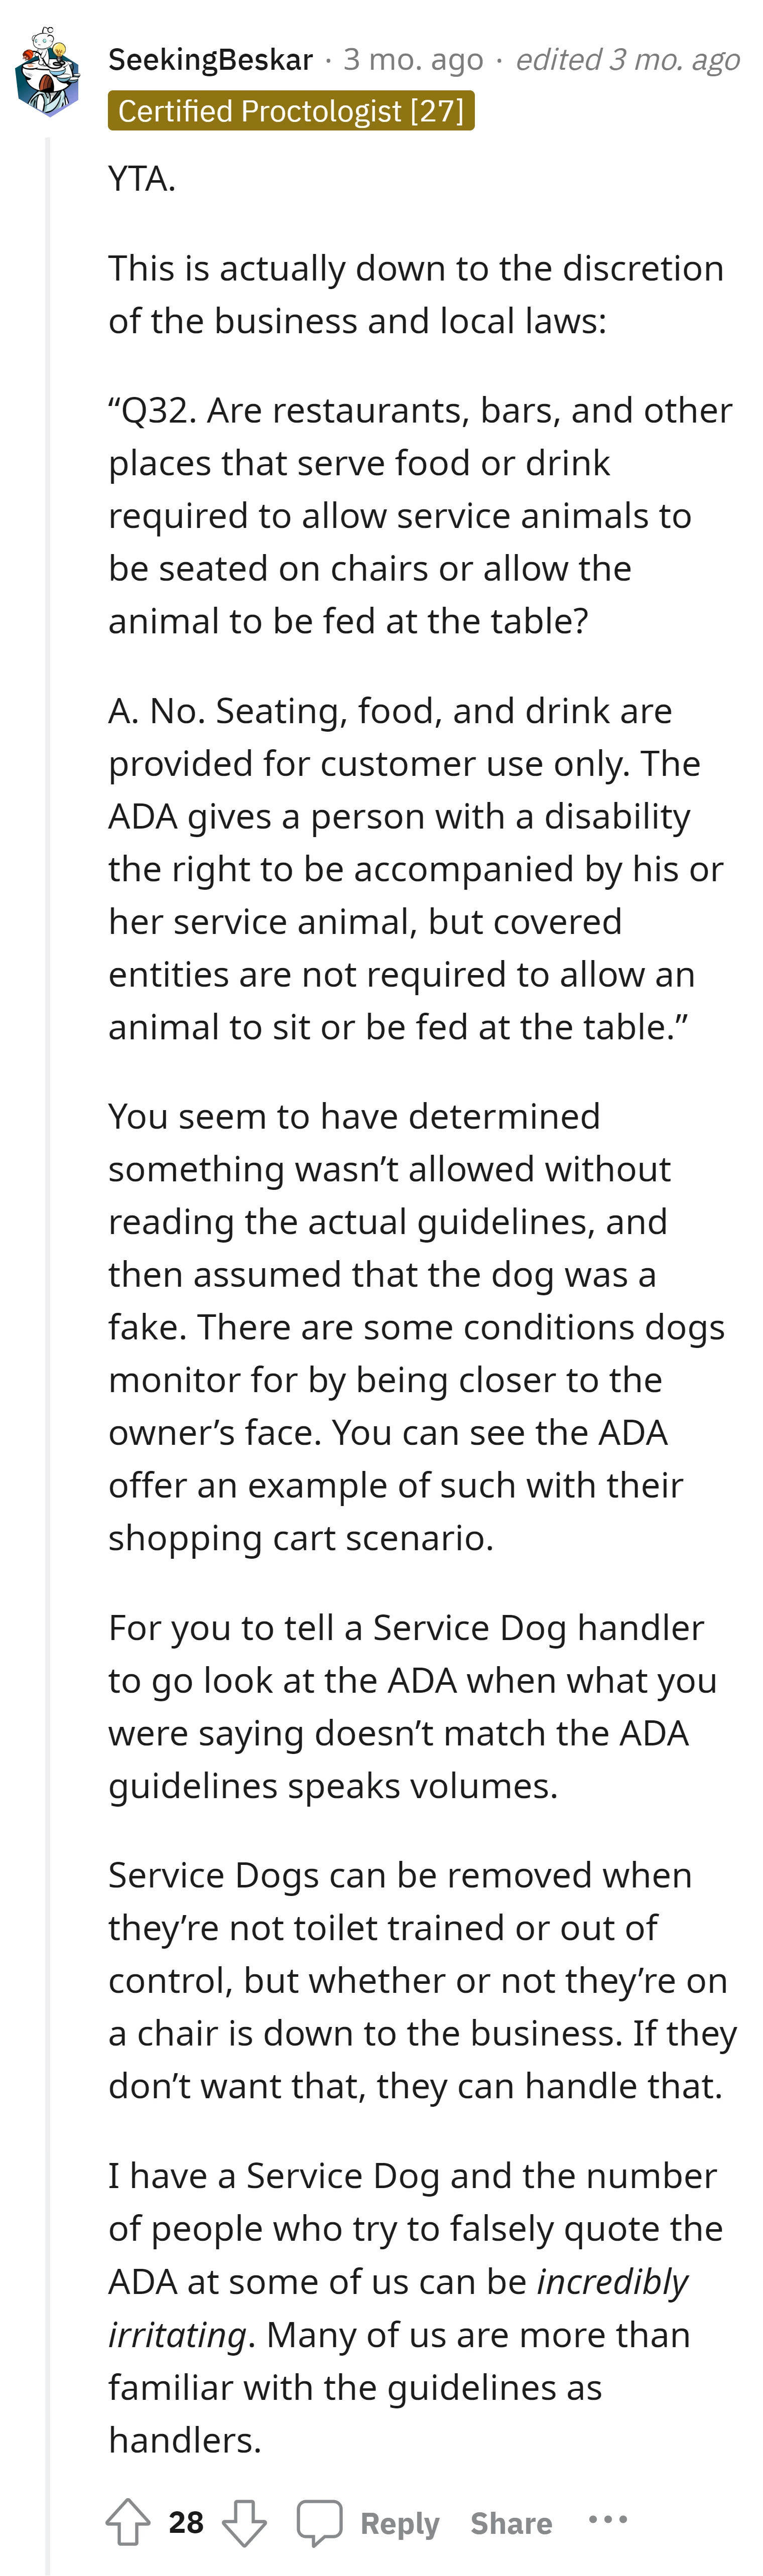 The seating of service dogs is at the discretion of the business and local laws